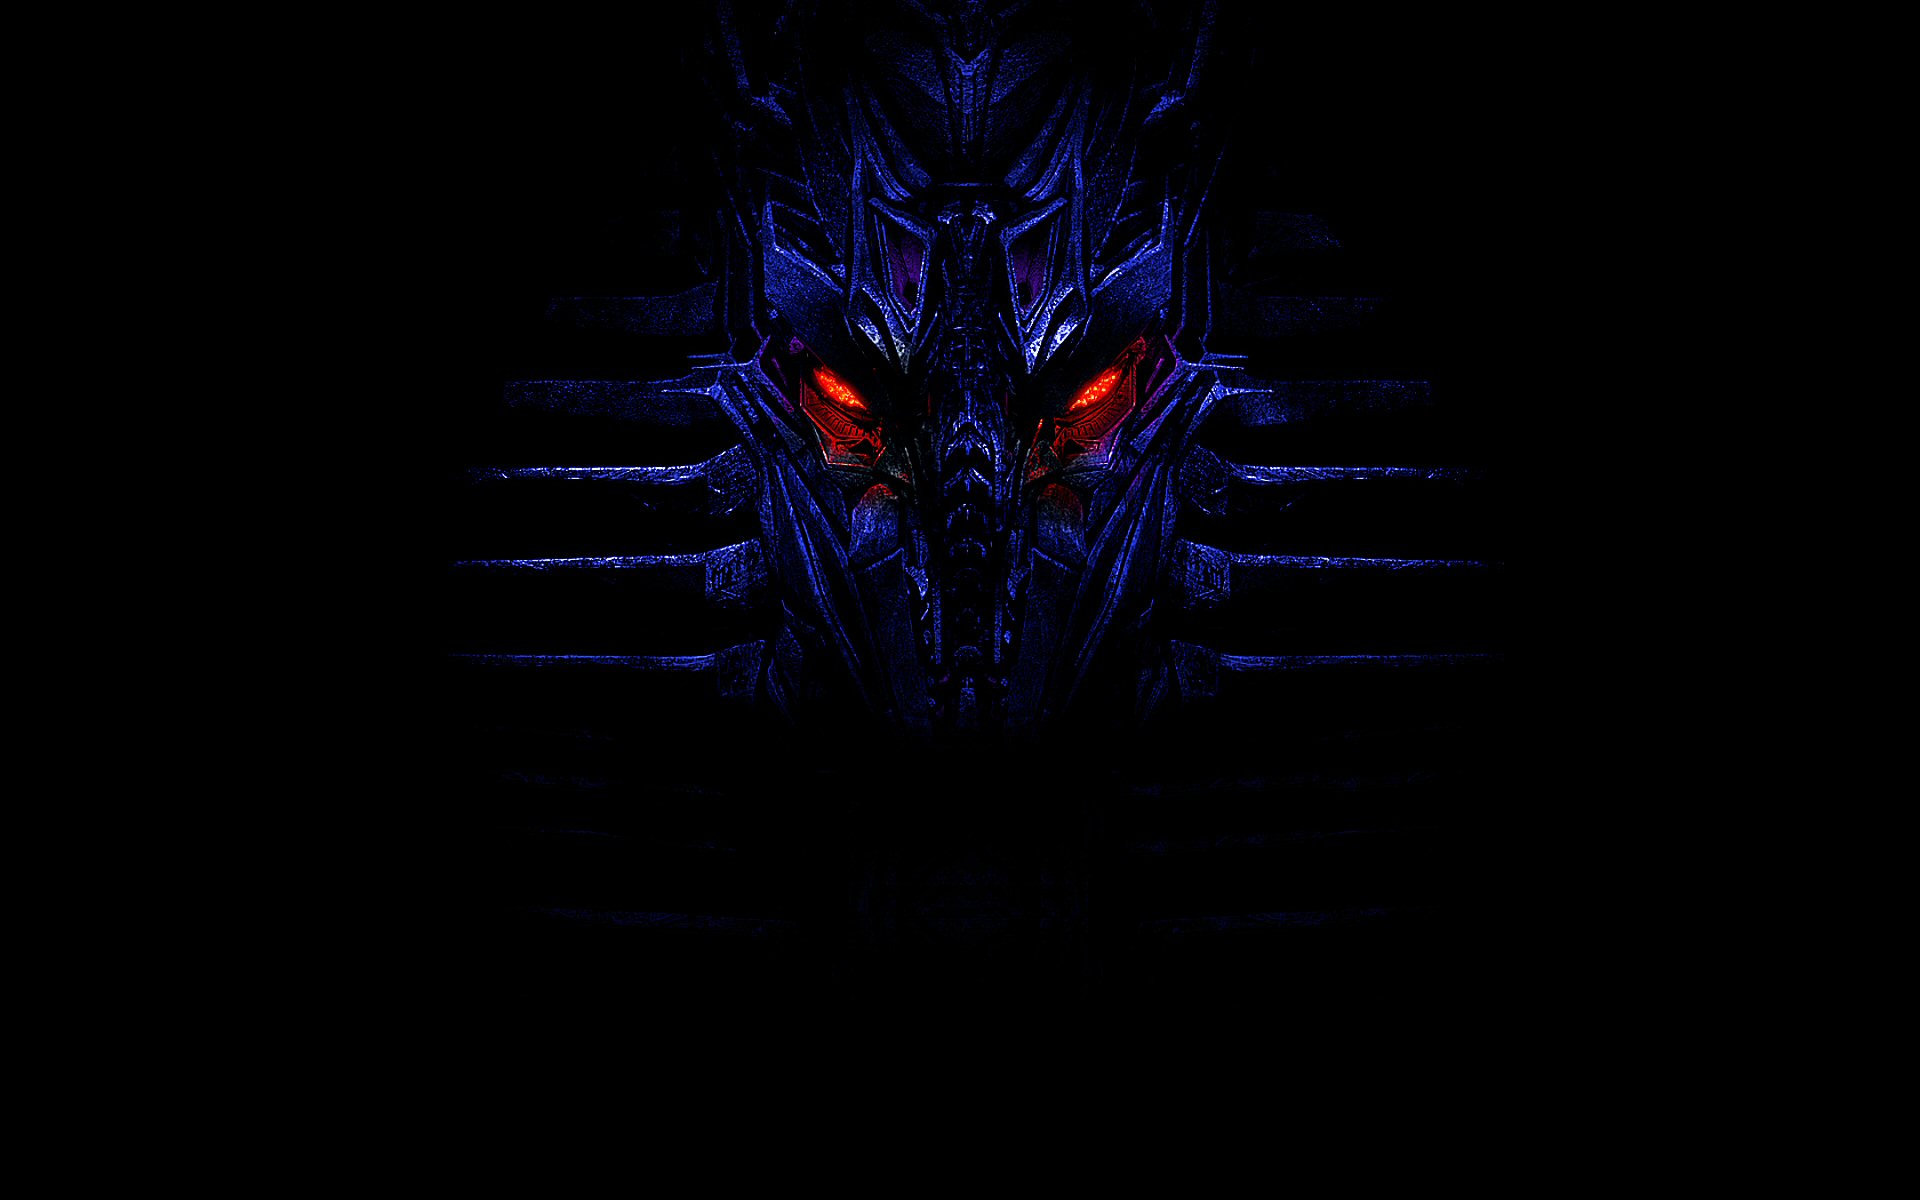 transformers, glow, dark, sci fi, blue cell phone wallpapers